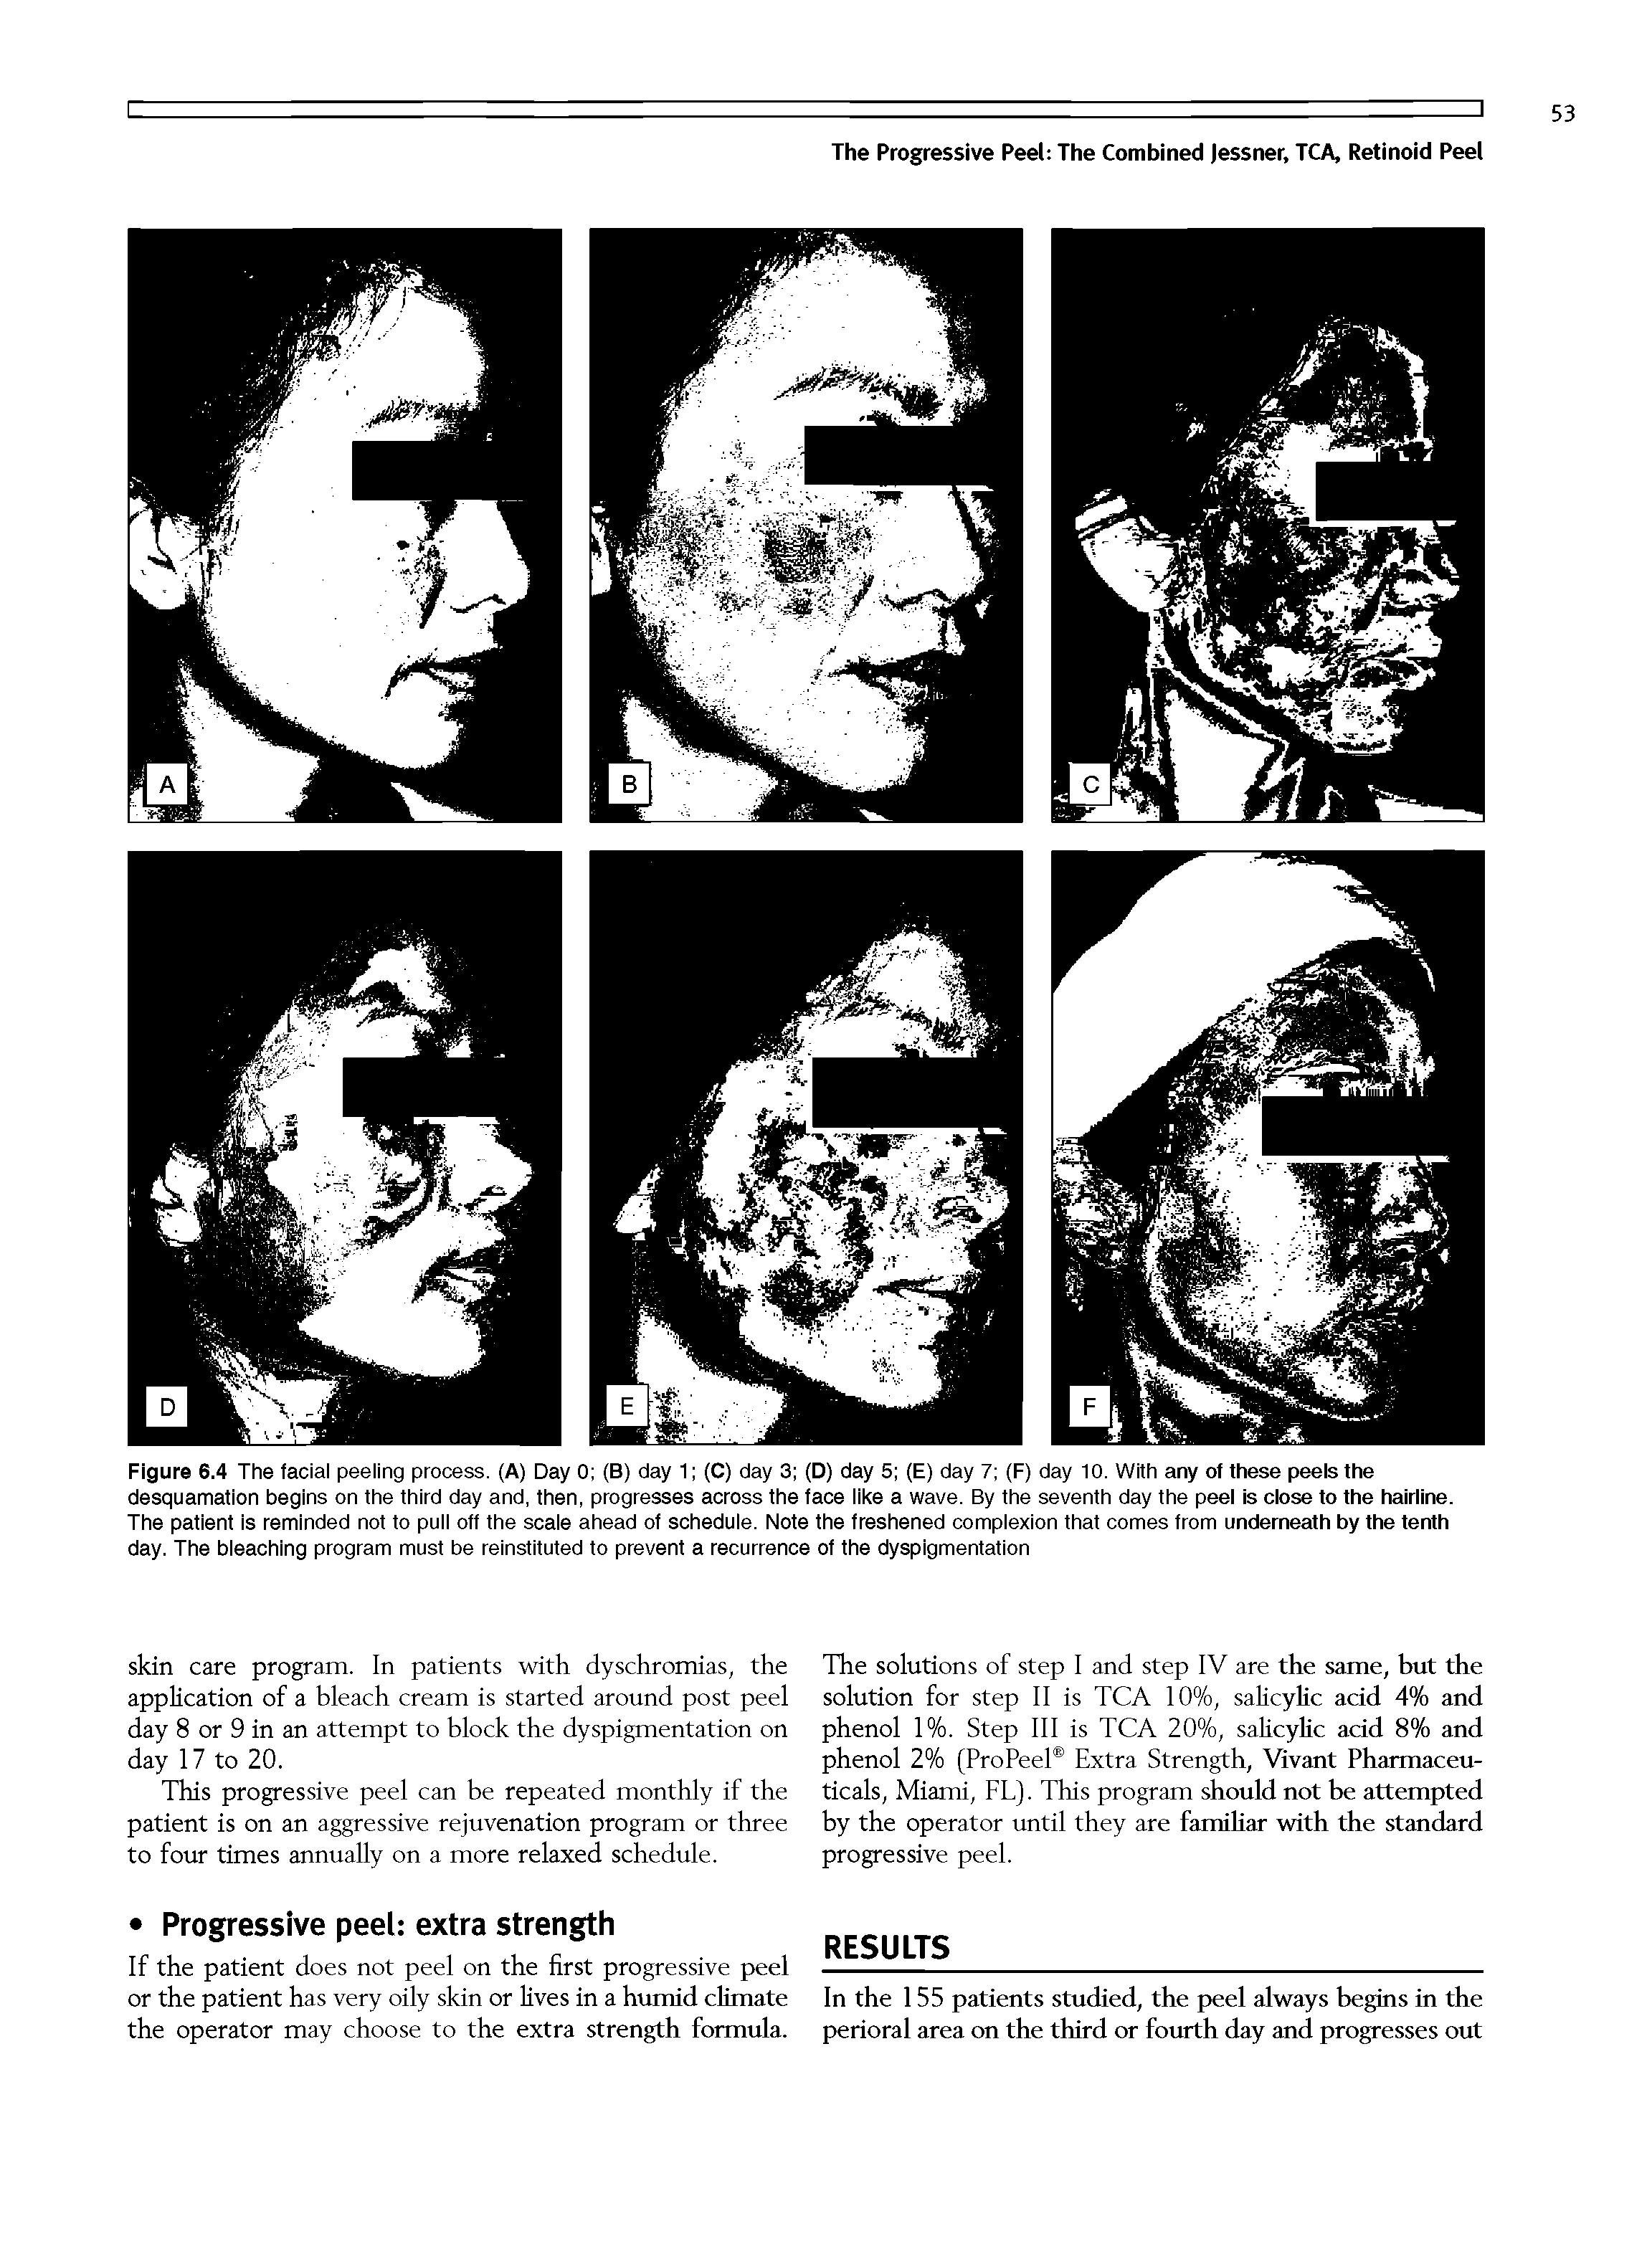 Figure 6.4 The facial peeling process. (A) Day 0 (B) day 1 (C) day 3 (D) day 5 (E) day 7 (F) day 10. With any of these peels the desquamation begins on the third day and, then, progresses across the face like a wave. By the seventh day the peel is close to the hairline. The patient Is reminded not to pull ott the scale ahead of schedule. Note the freshened complexion that comes trom underneath by the tenth day. The bleaching program must be reinstituted to prevent a recurrence of the dyspigmentation...